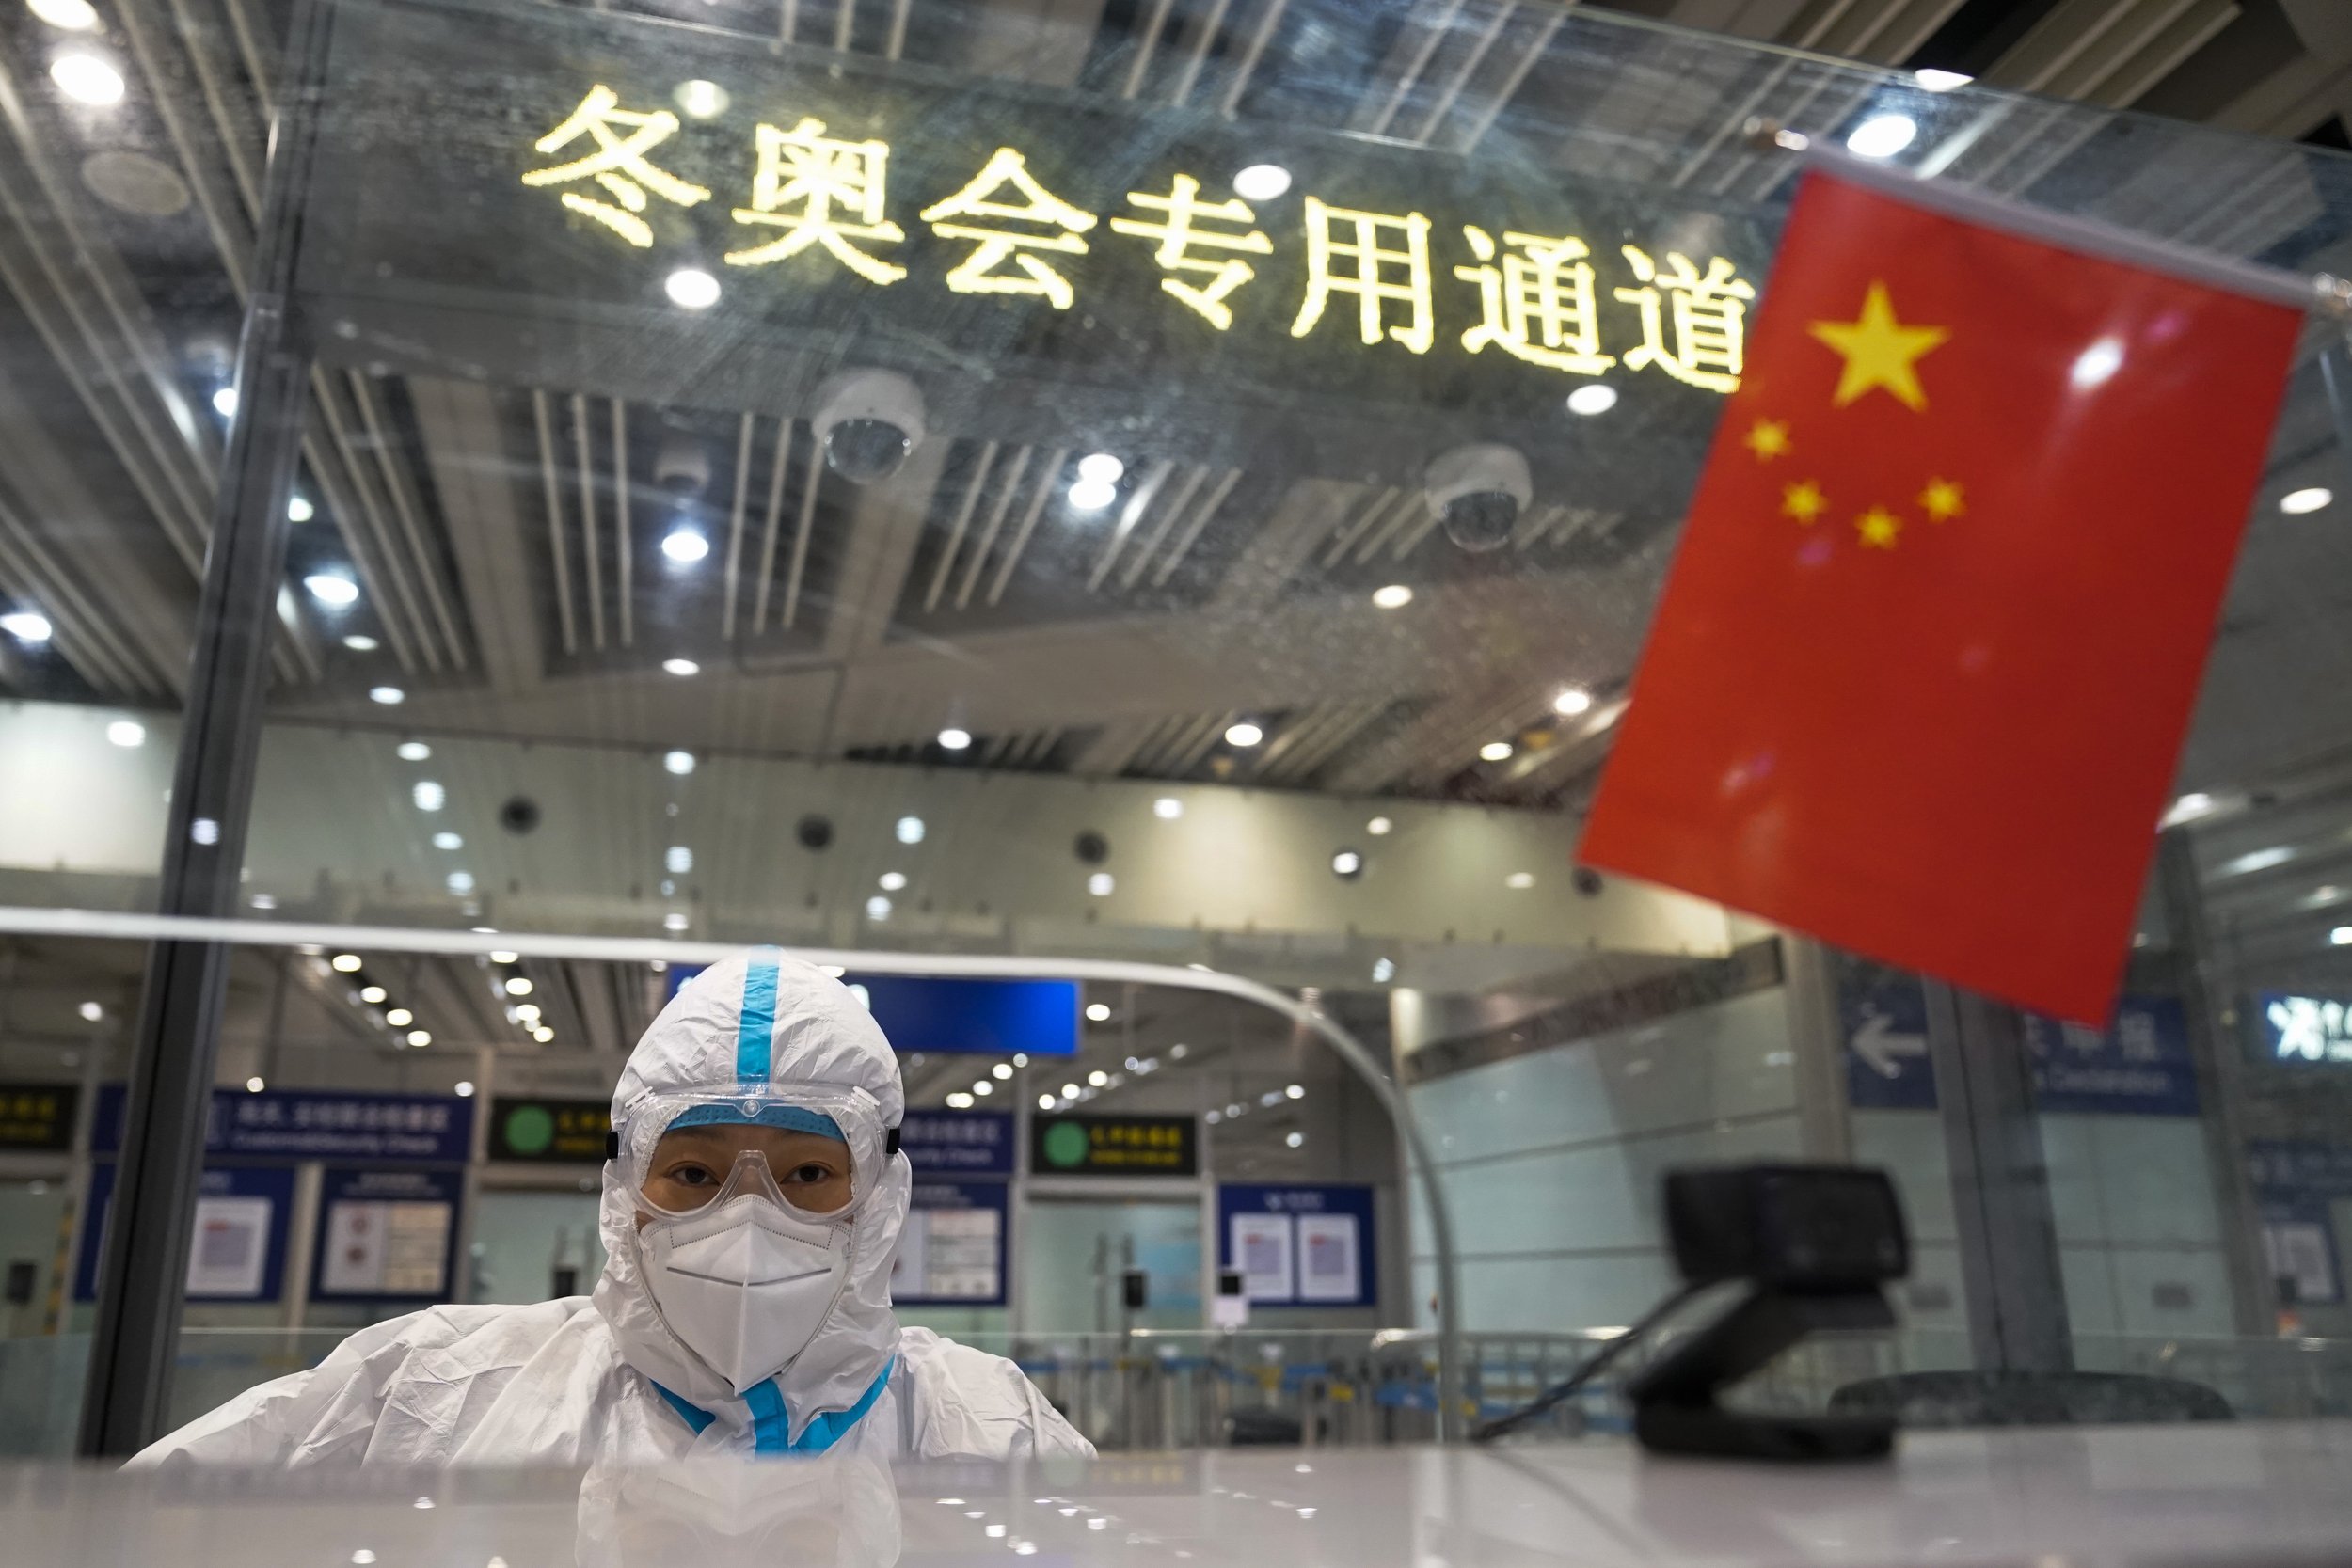  A customs worker checks forms at the Beijing Capital International Airport after the conclusion of the 2022 Winter Olympics, Sunday, Feb. 20, 2022, in Beijing. (AP Photo/Ashley Landis) 